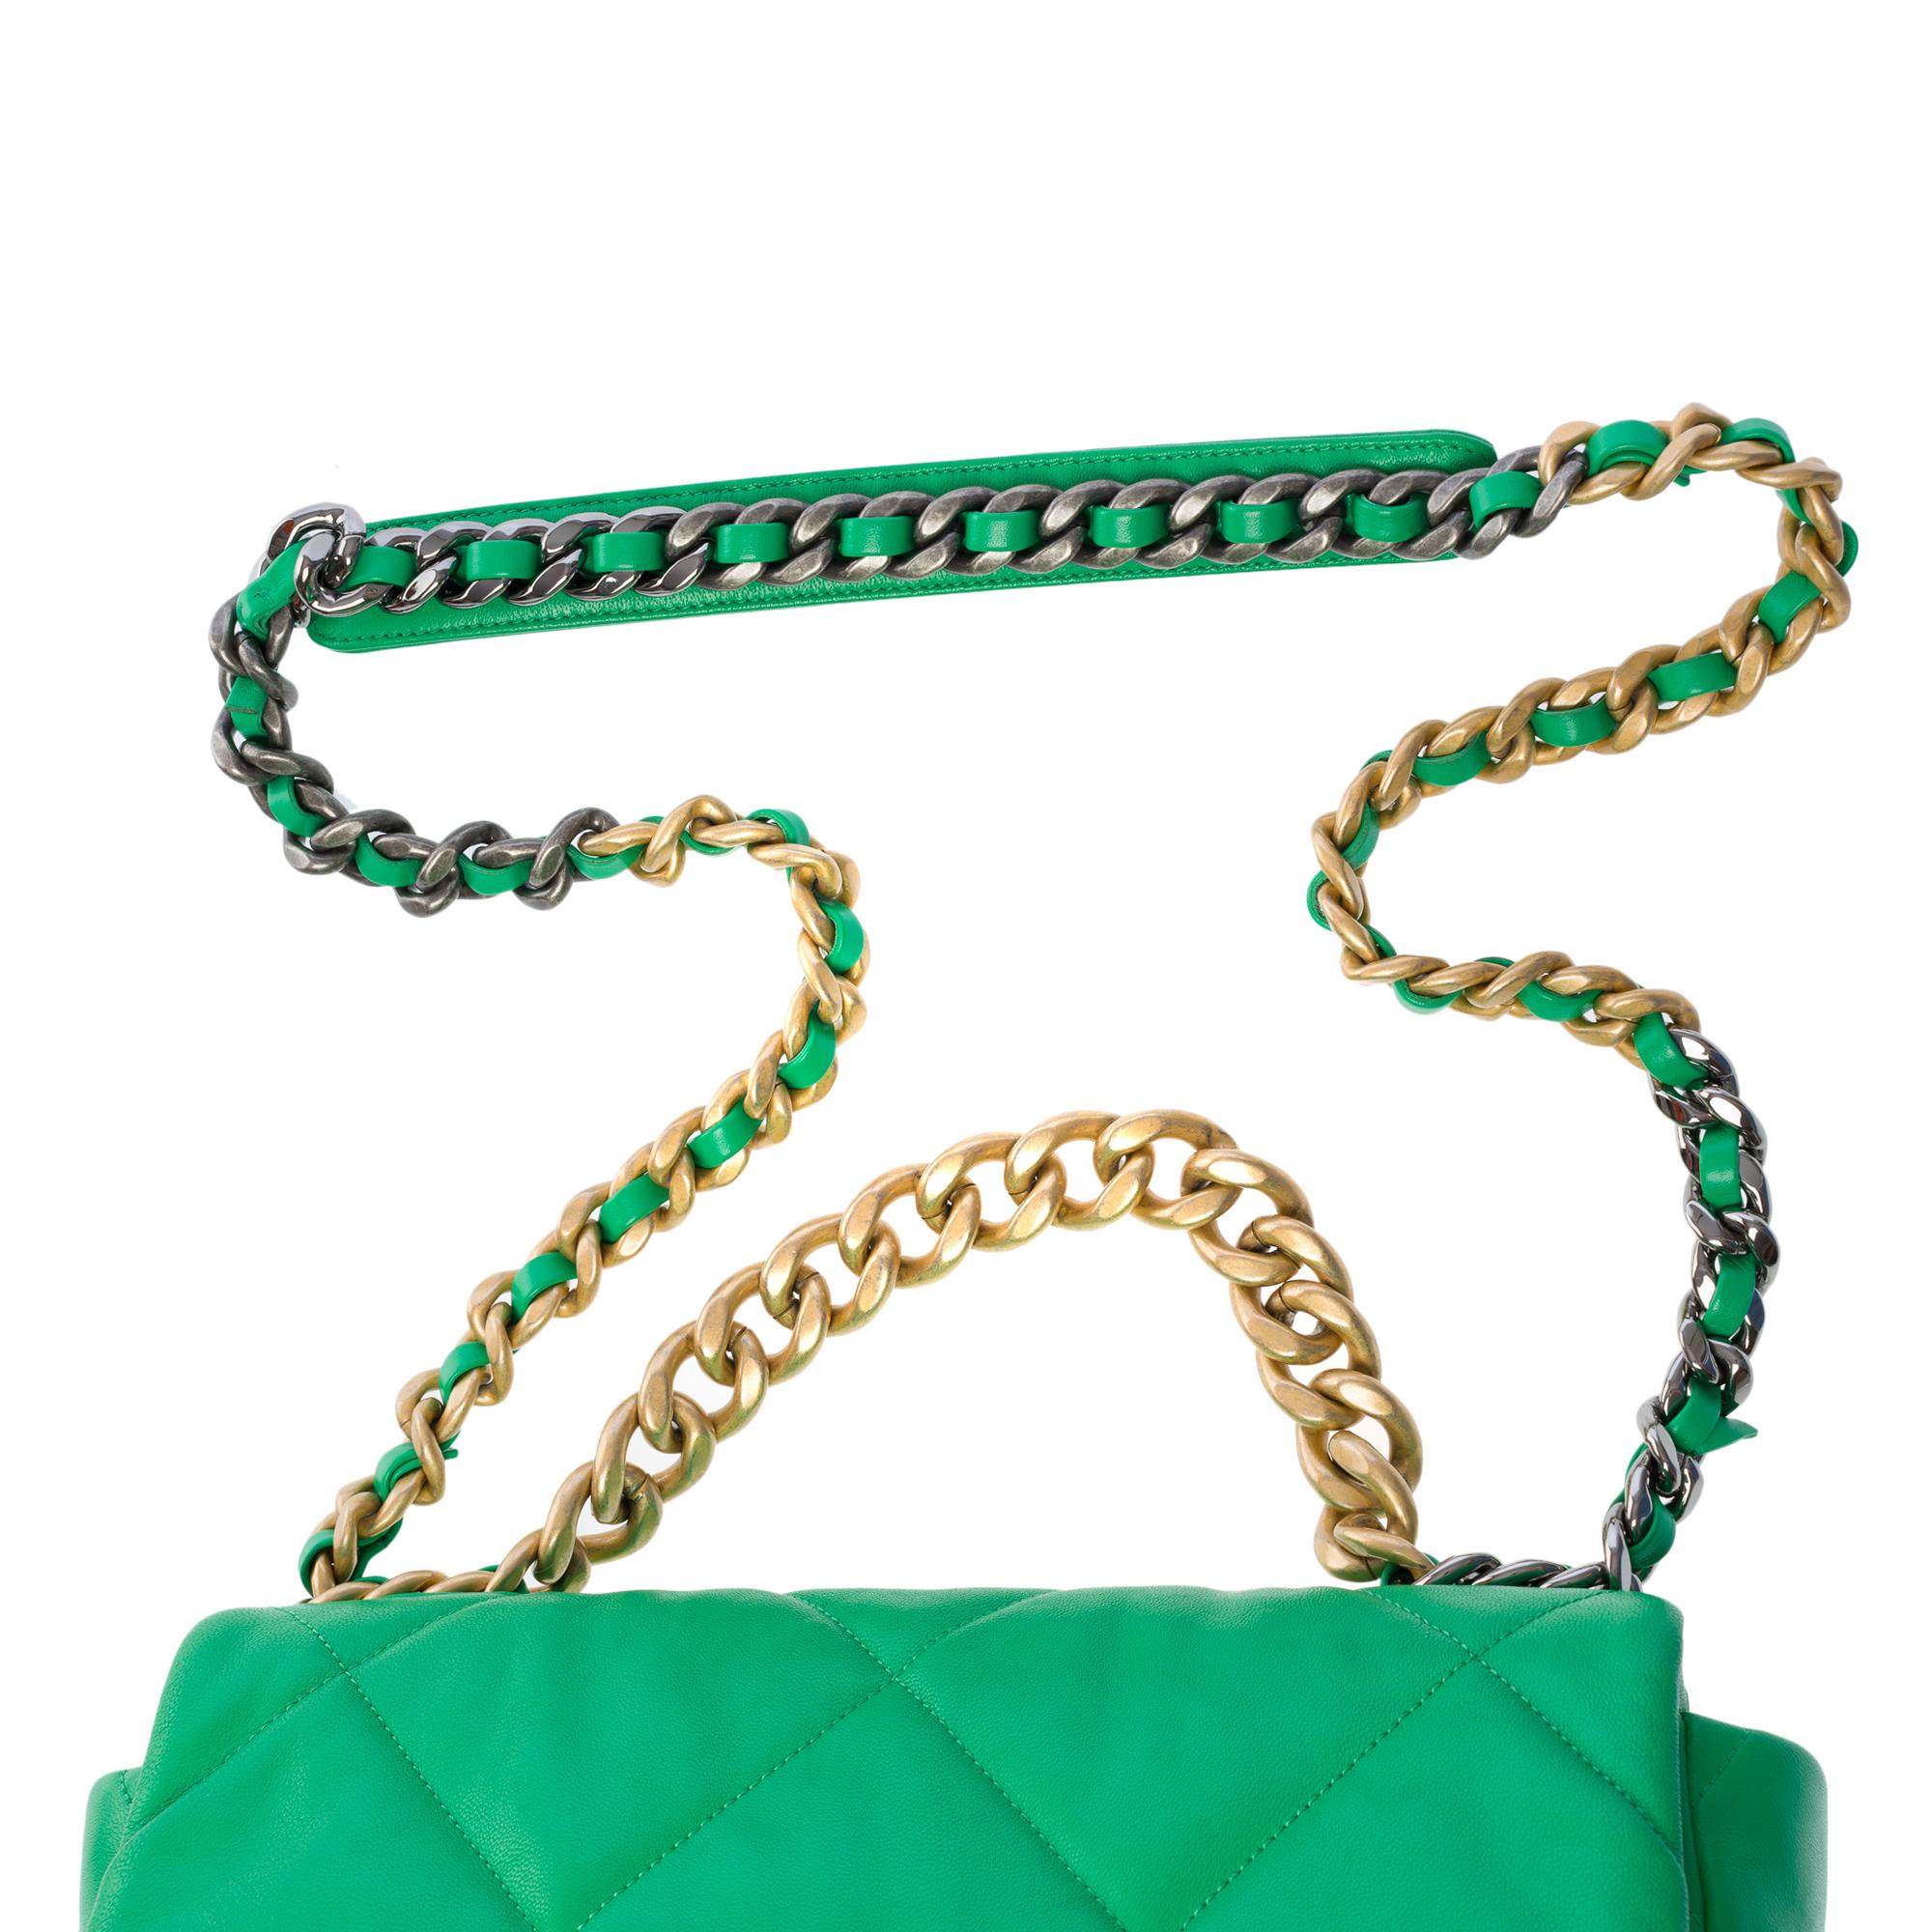 Stunning Chanel 19 shoulder bag in Green quilted leather , Matt gold and SHW 4